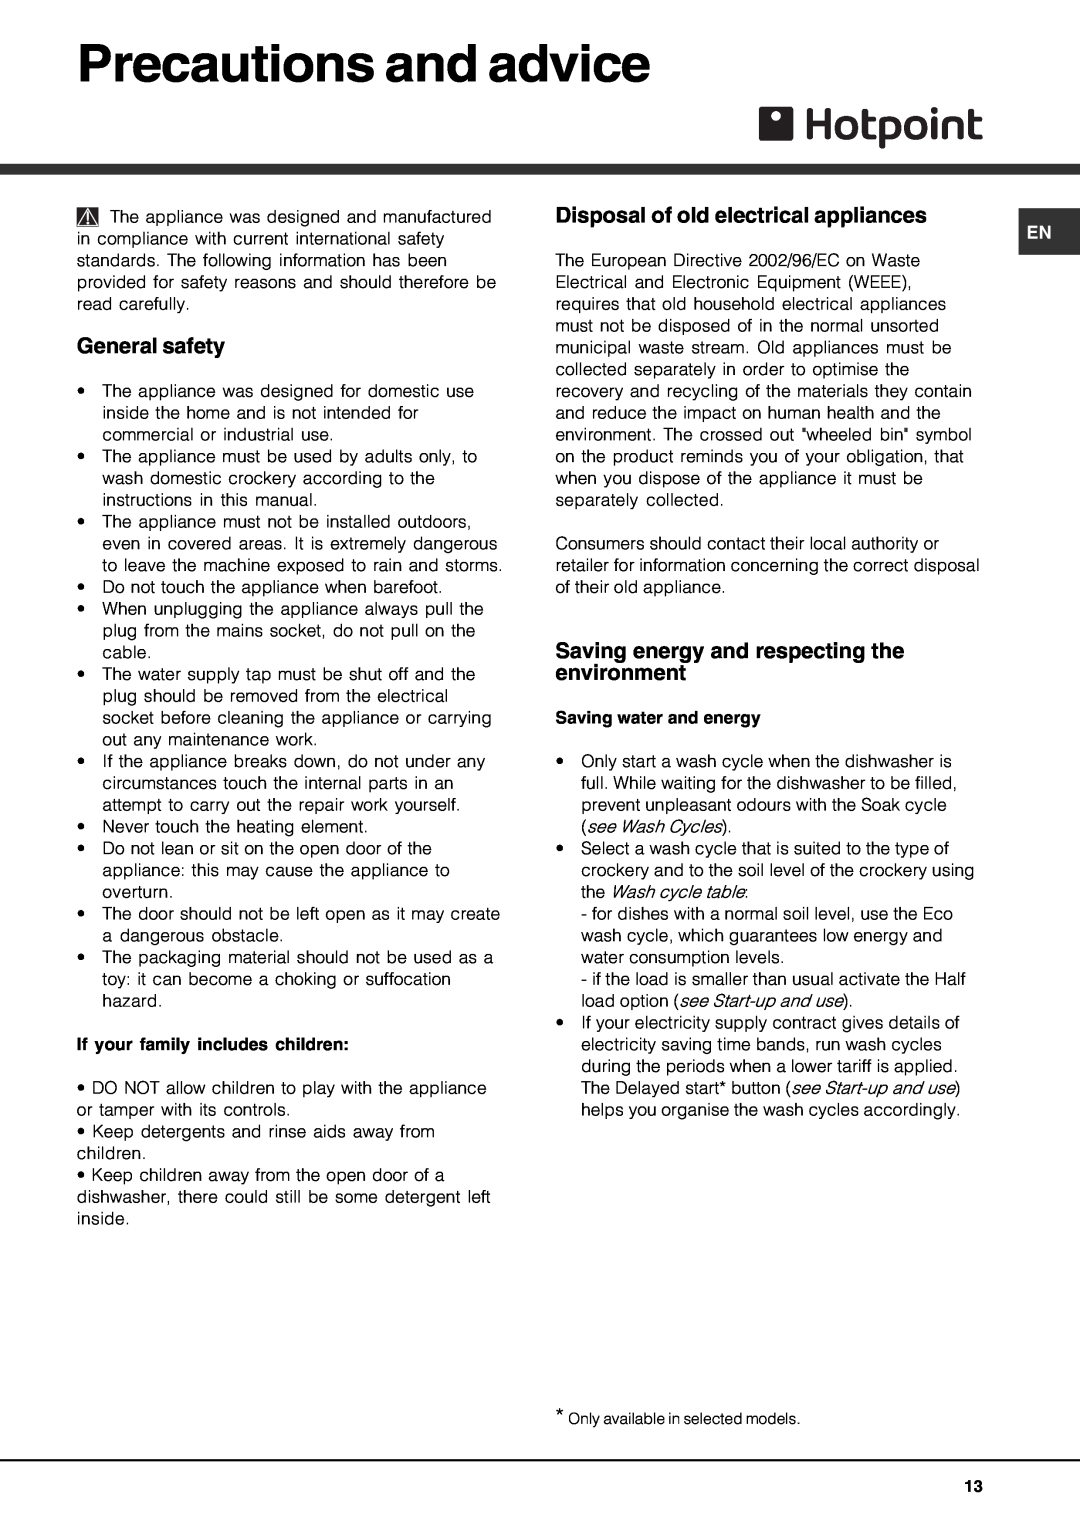 Hotpoint LFT 321 manual Precautions and advice, General safety, Disposal of old electrical appliances 